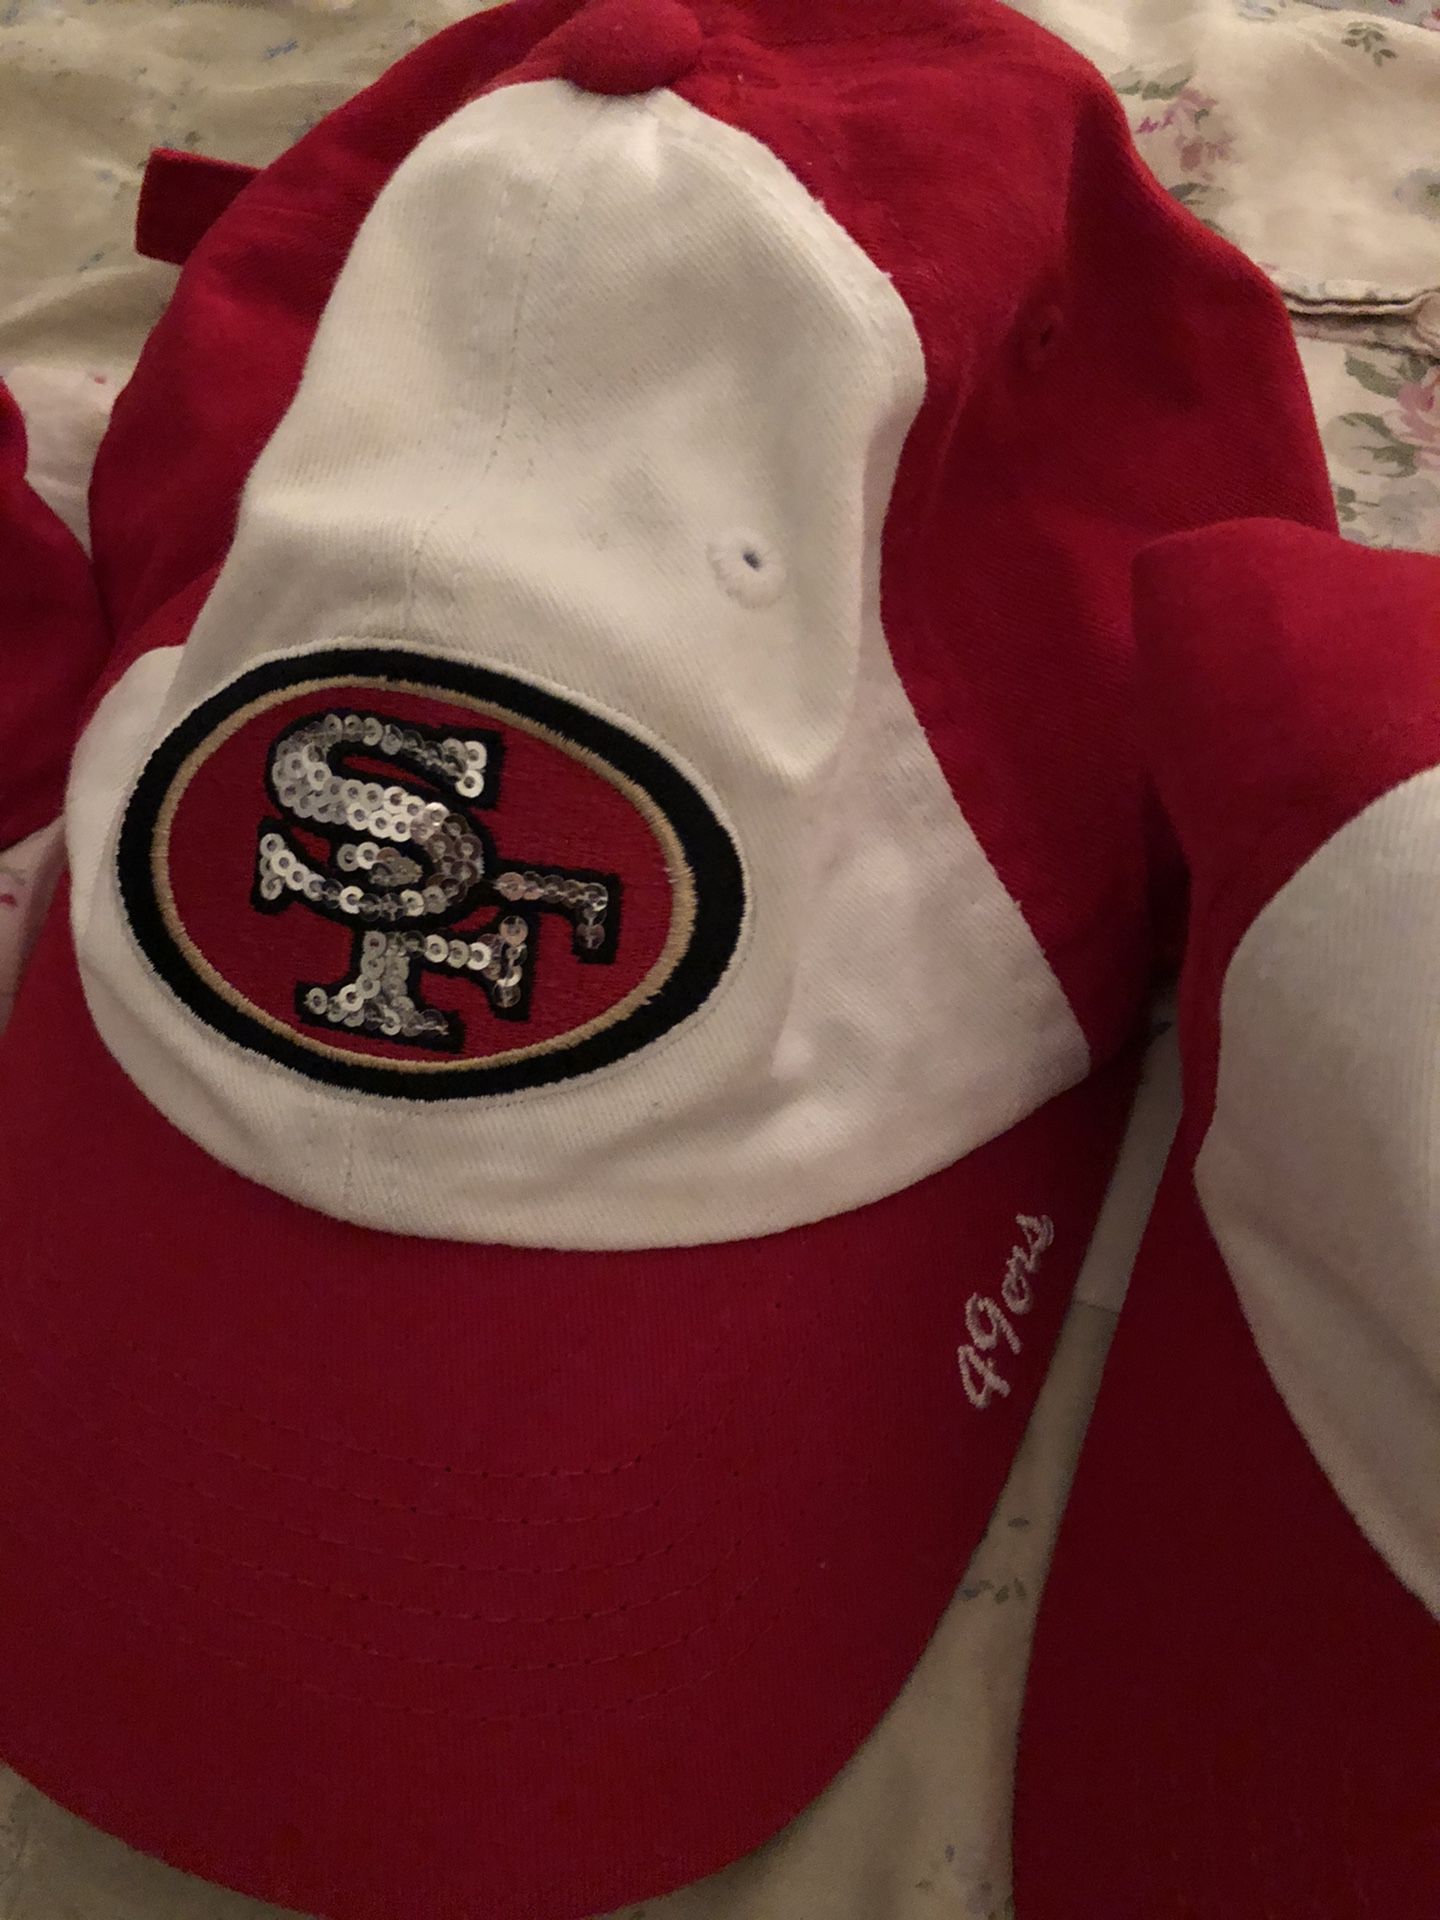 New 49ers football hat for ladies brand new $10